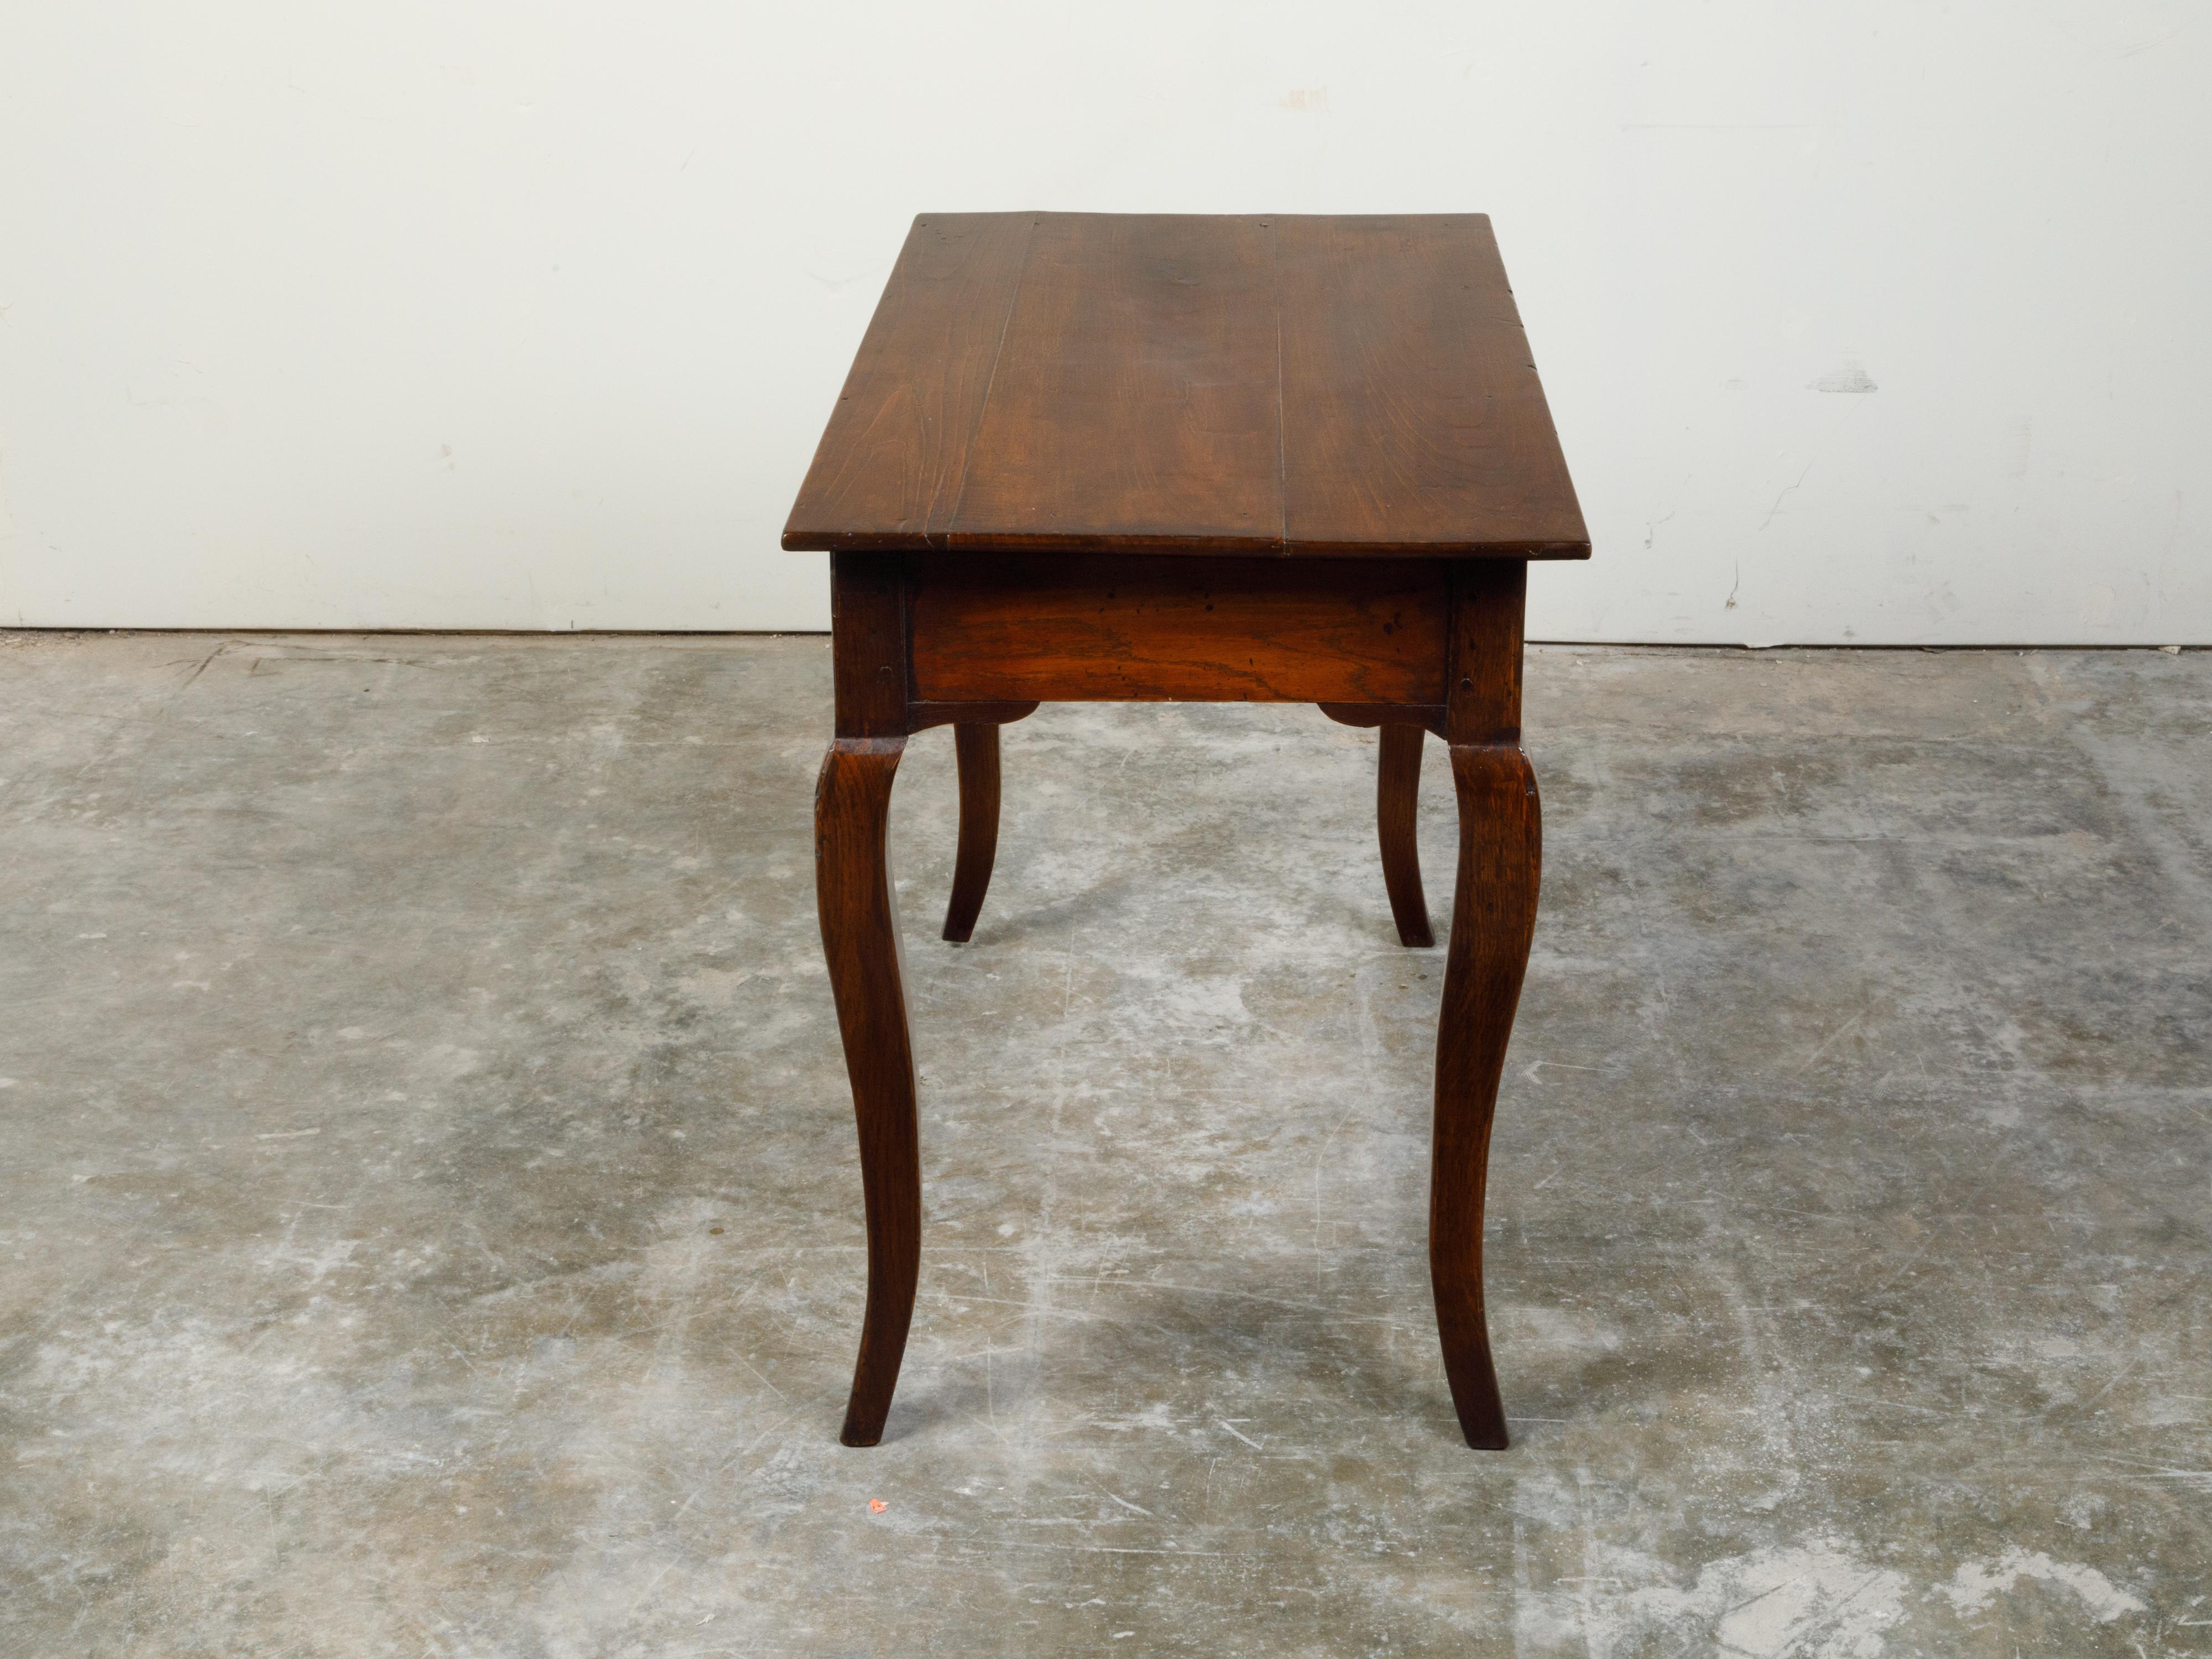 French Louis XV Style 19th Century Walnut Desk with Drawers and Cabriole Legs For Sale 4